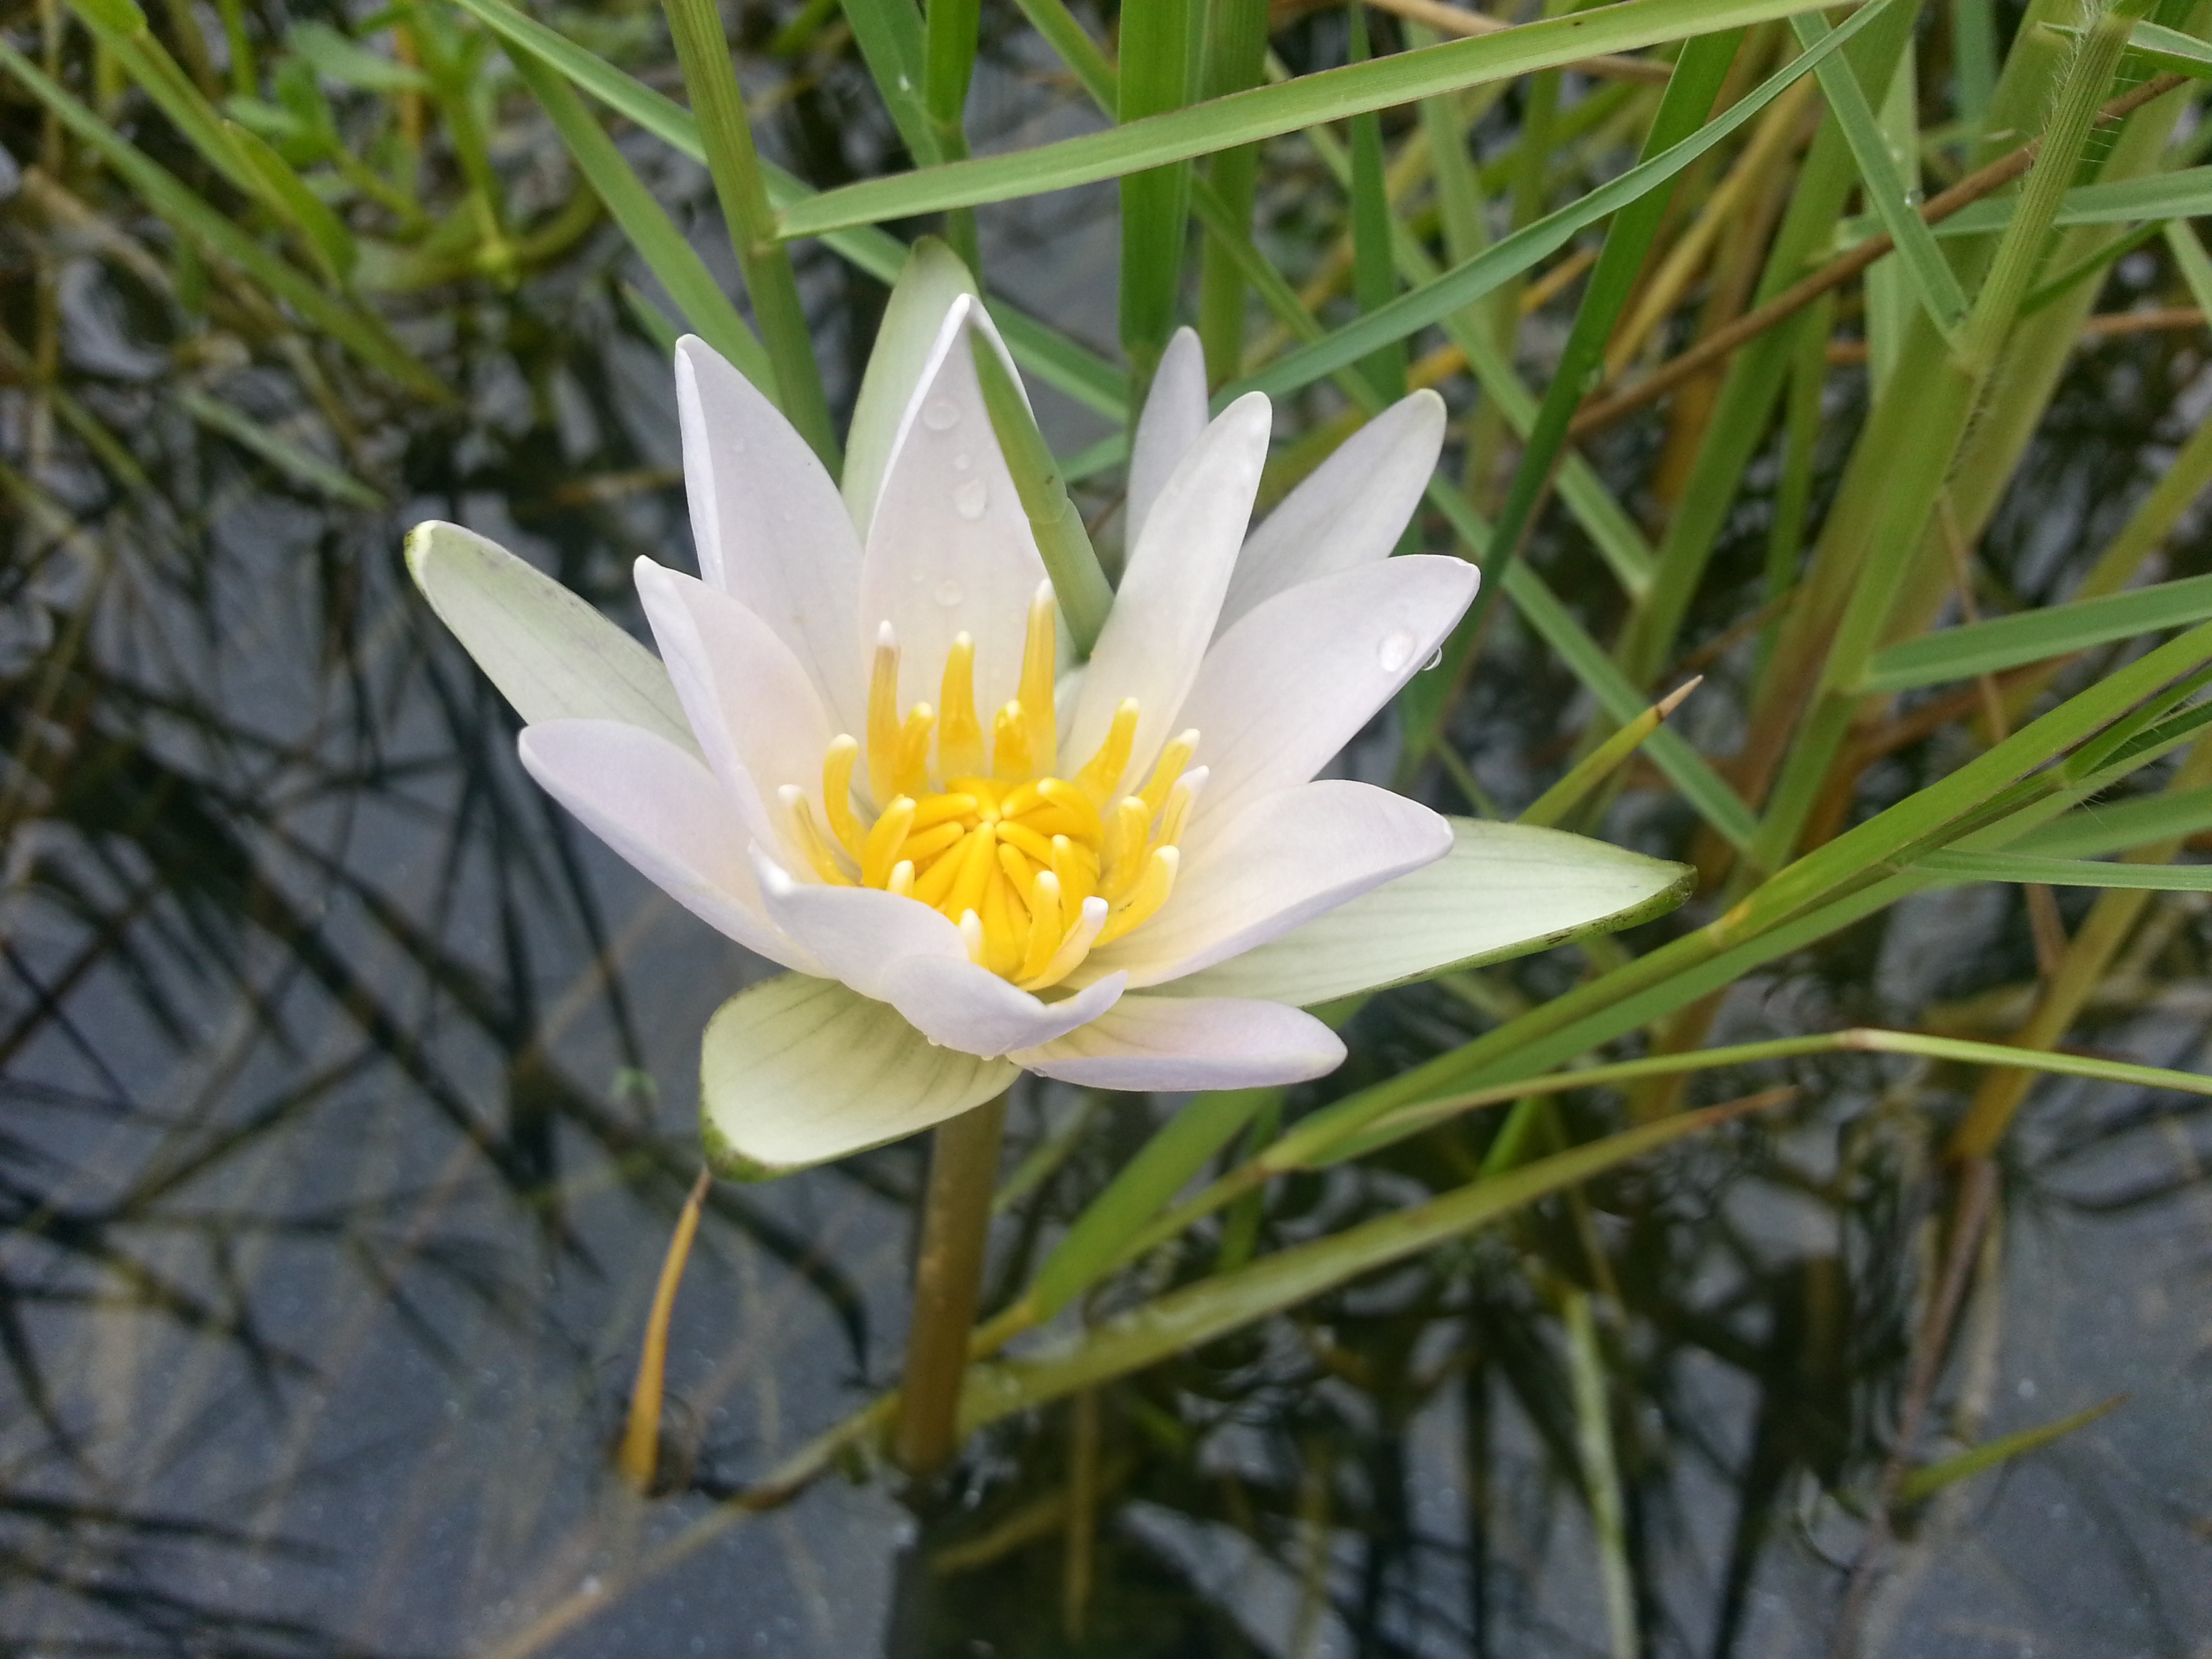 White water lily (Nyphaea odorata) at S332B in Taylor Slough